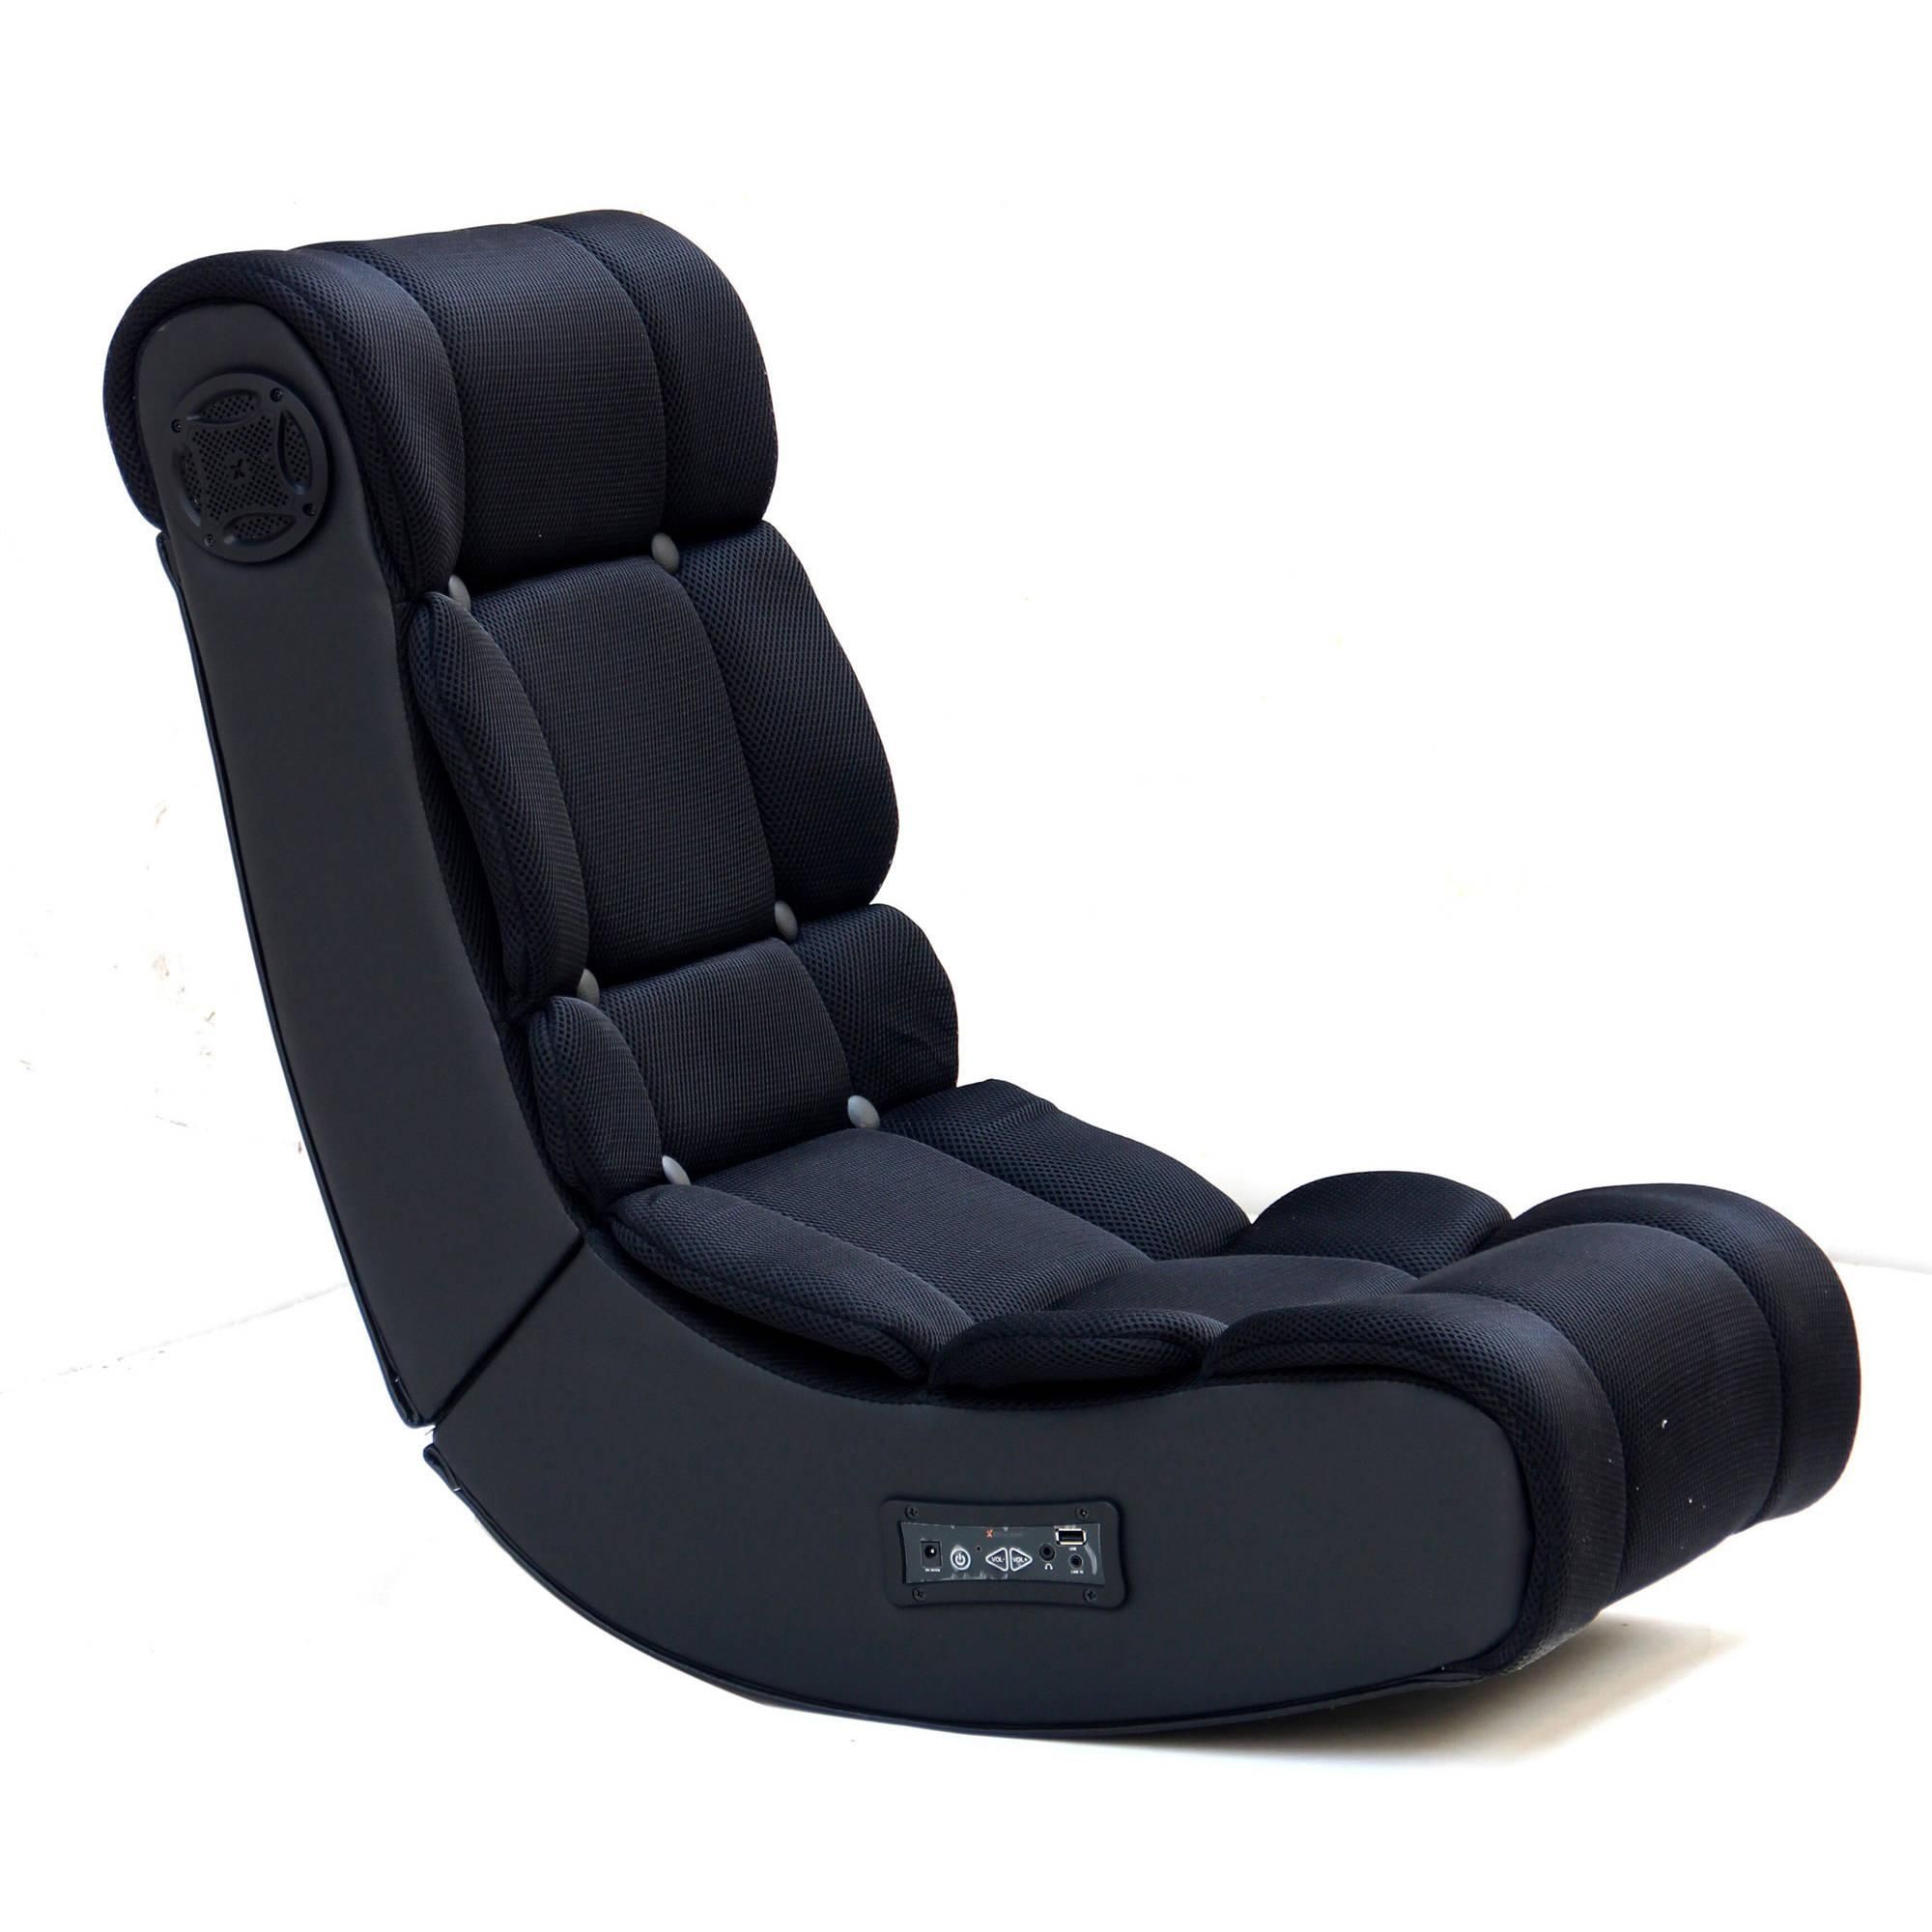 Game Chairs With Speakers Throughout Gaming Sofa Chairs (View 5 of 20)